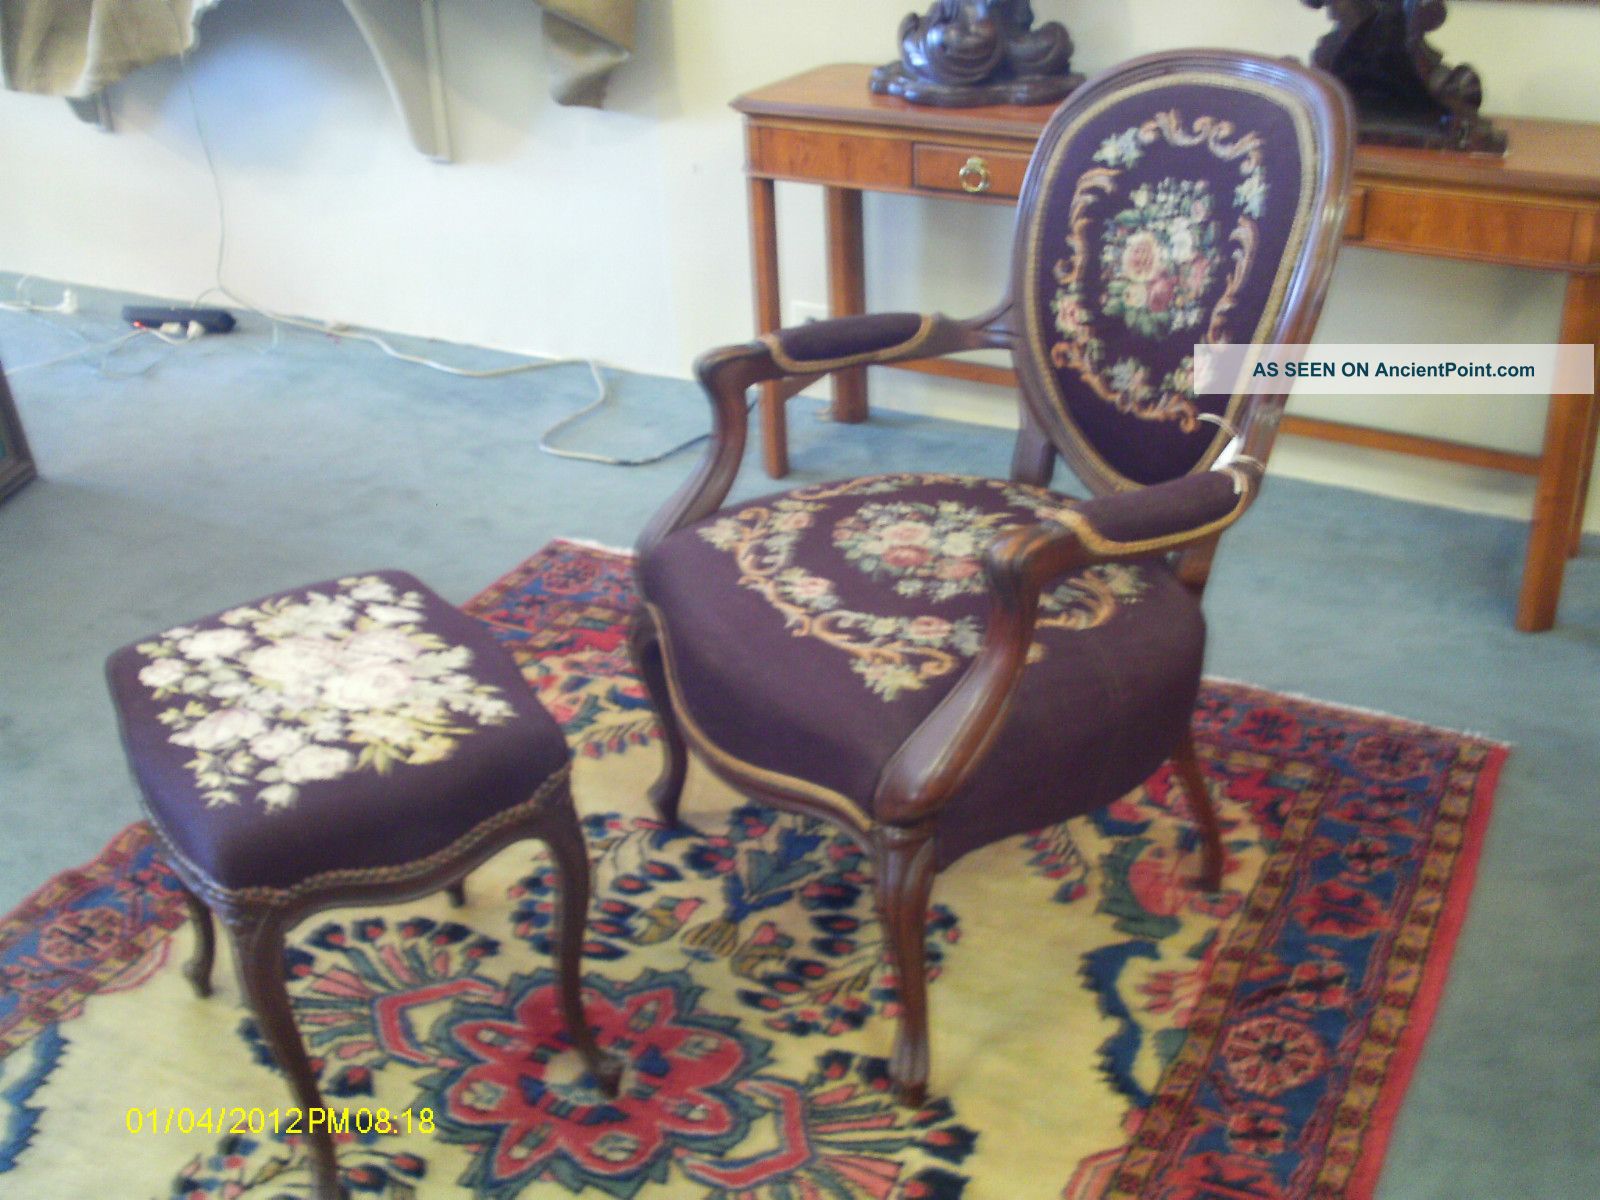 Wow Charming Antique French Needlepoint Chair With Matching Ottoman 1900-1950 photo